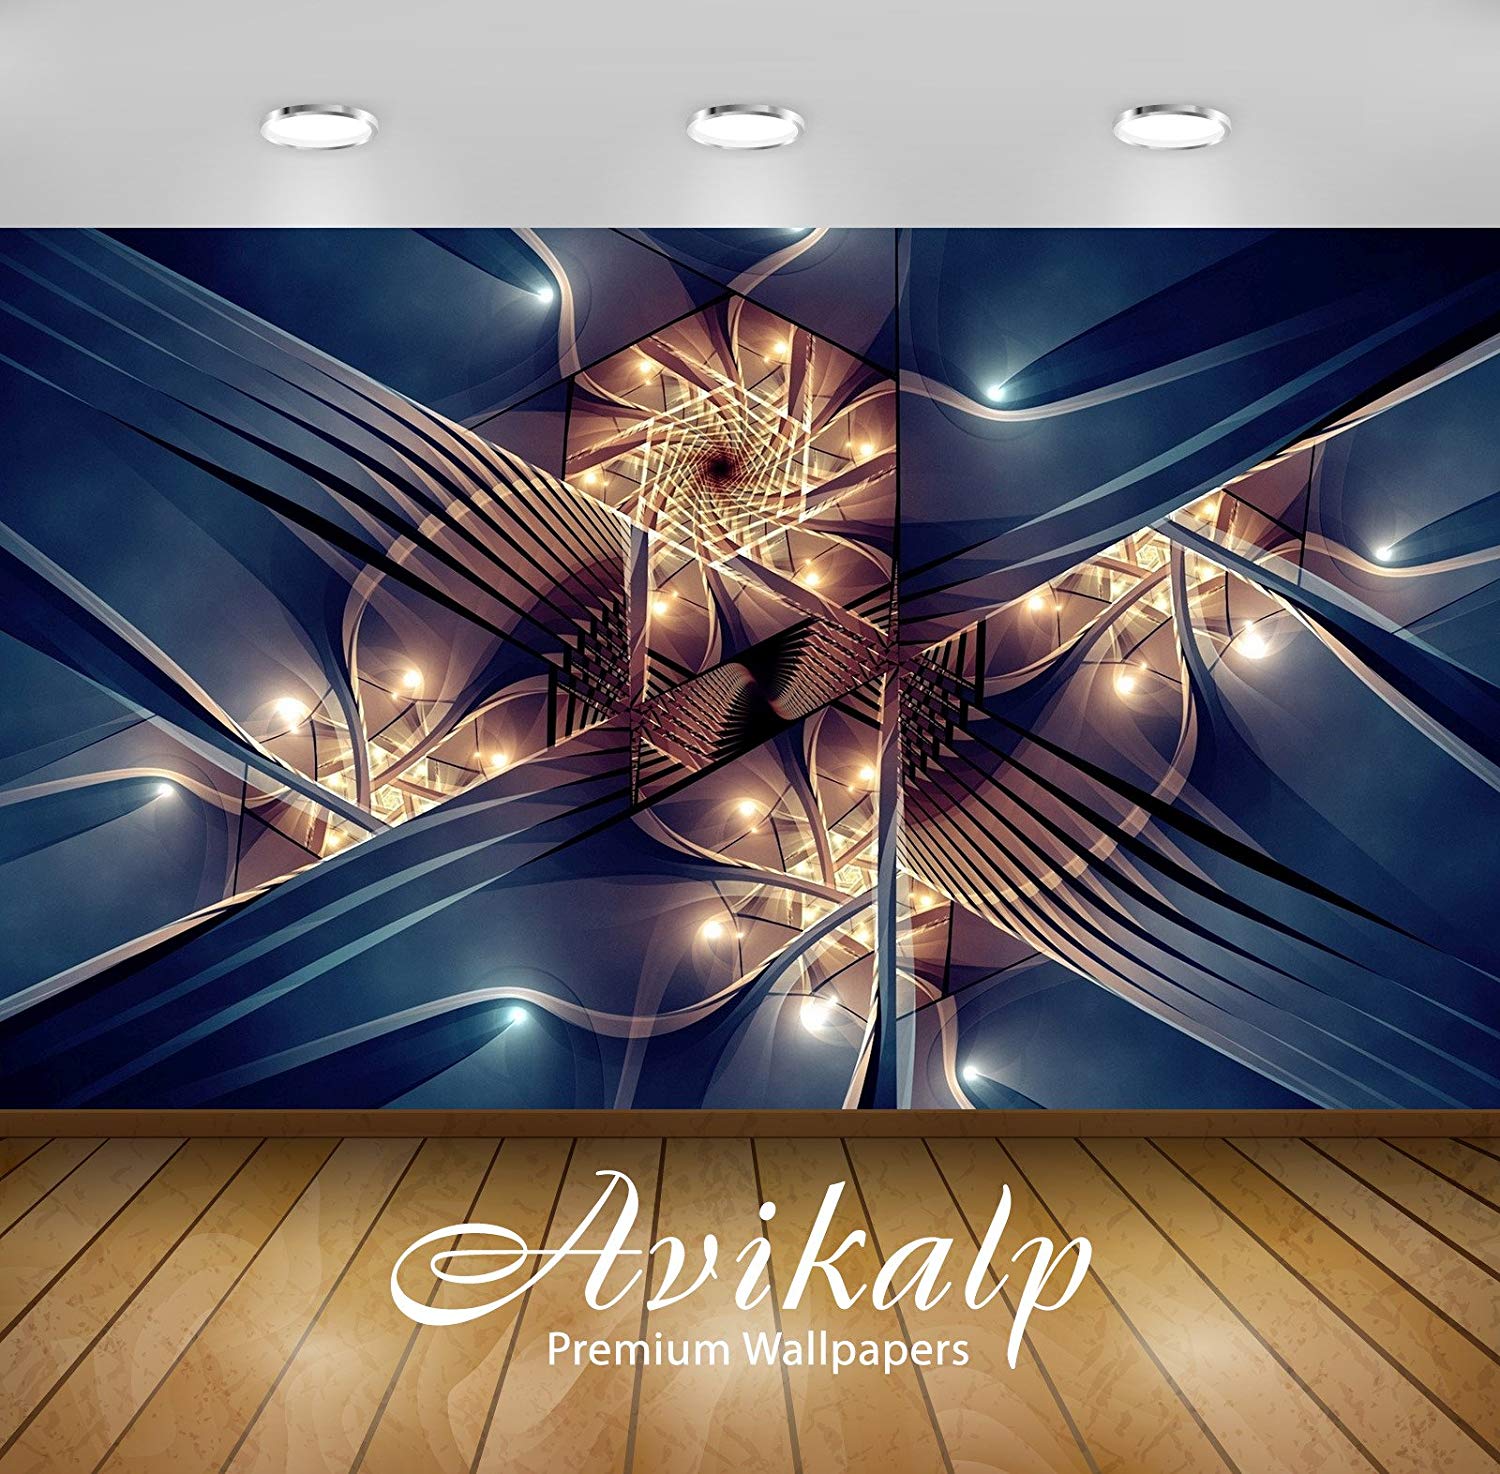 lit wallpapers,sky,graphic design,ceiling,event,graphics